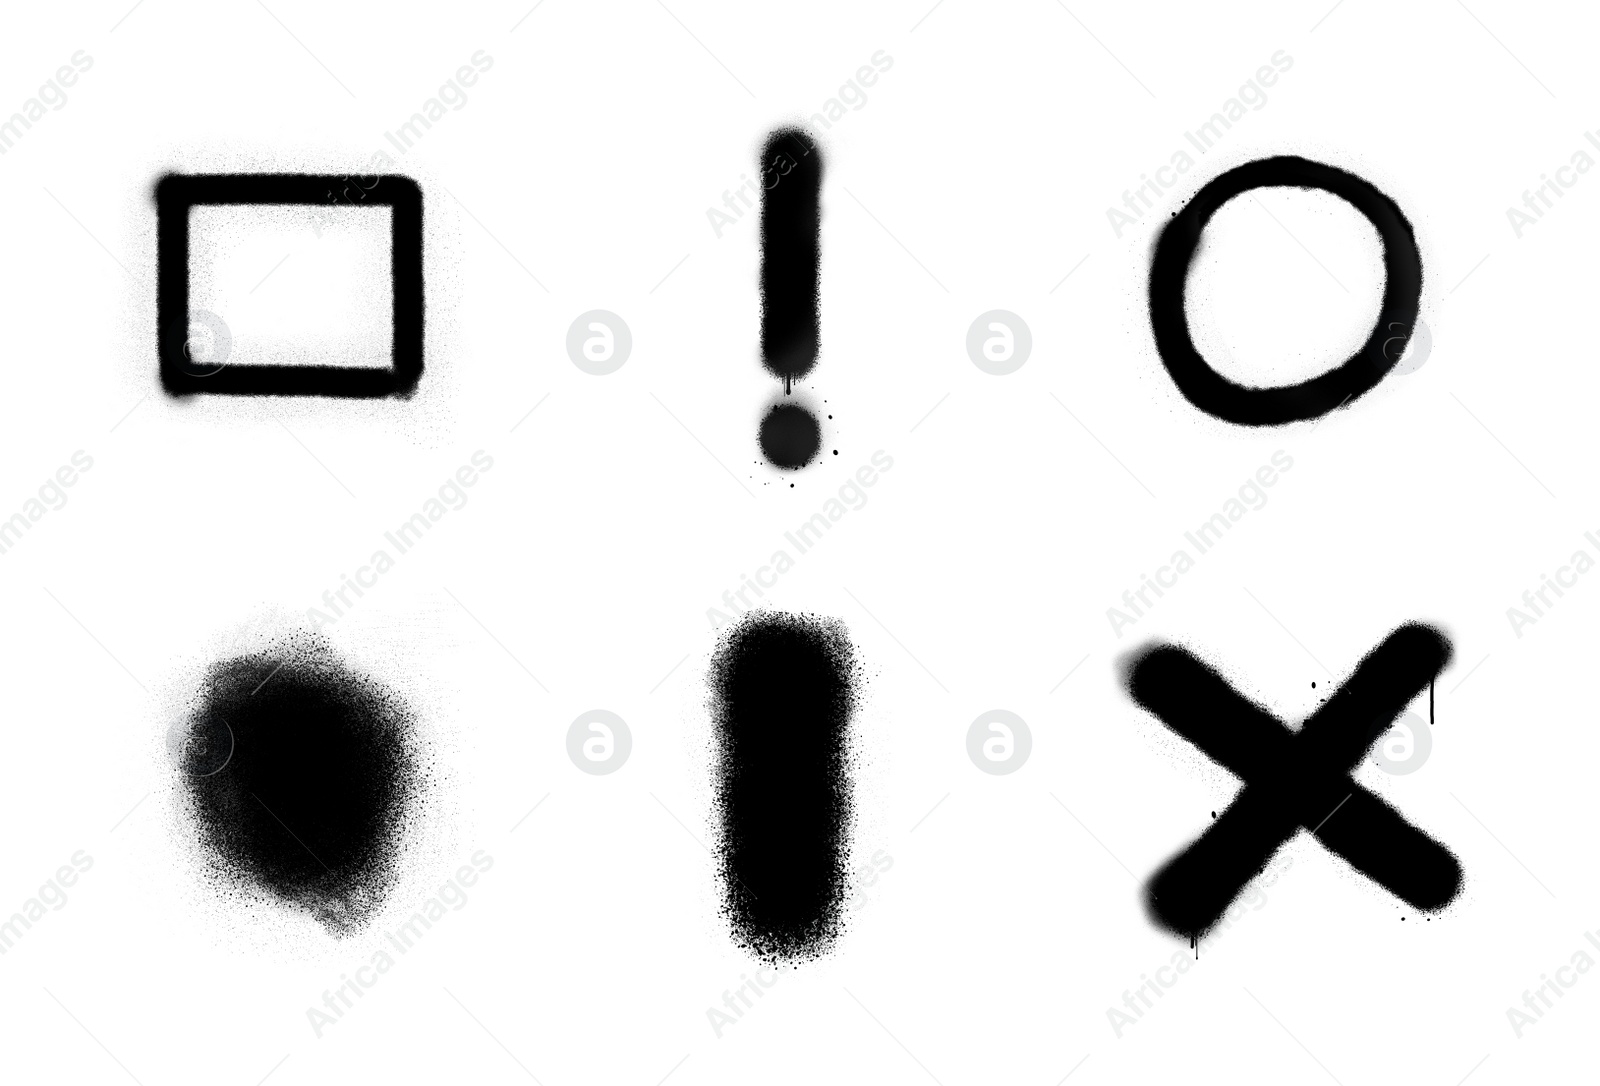 Illustration of Symbols drawn by black spray paint on white background, collage